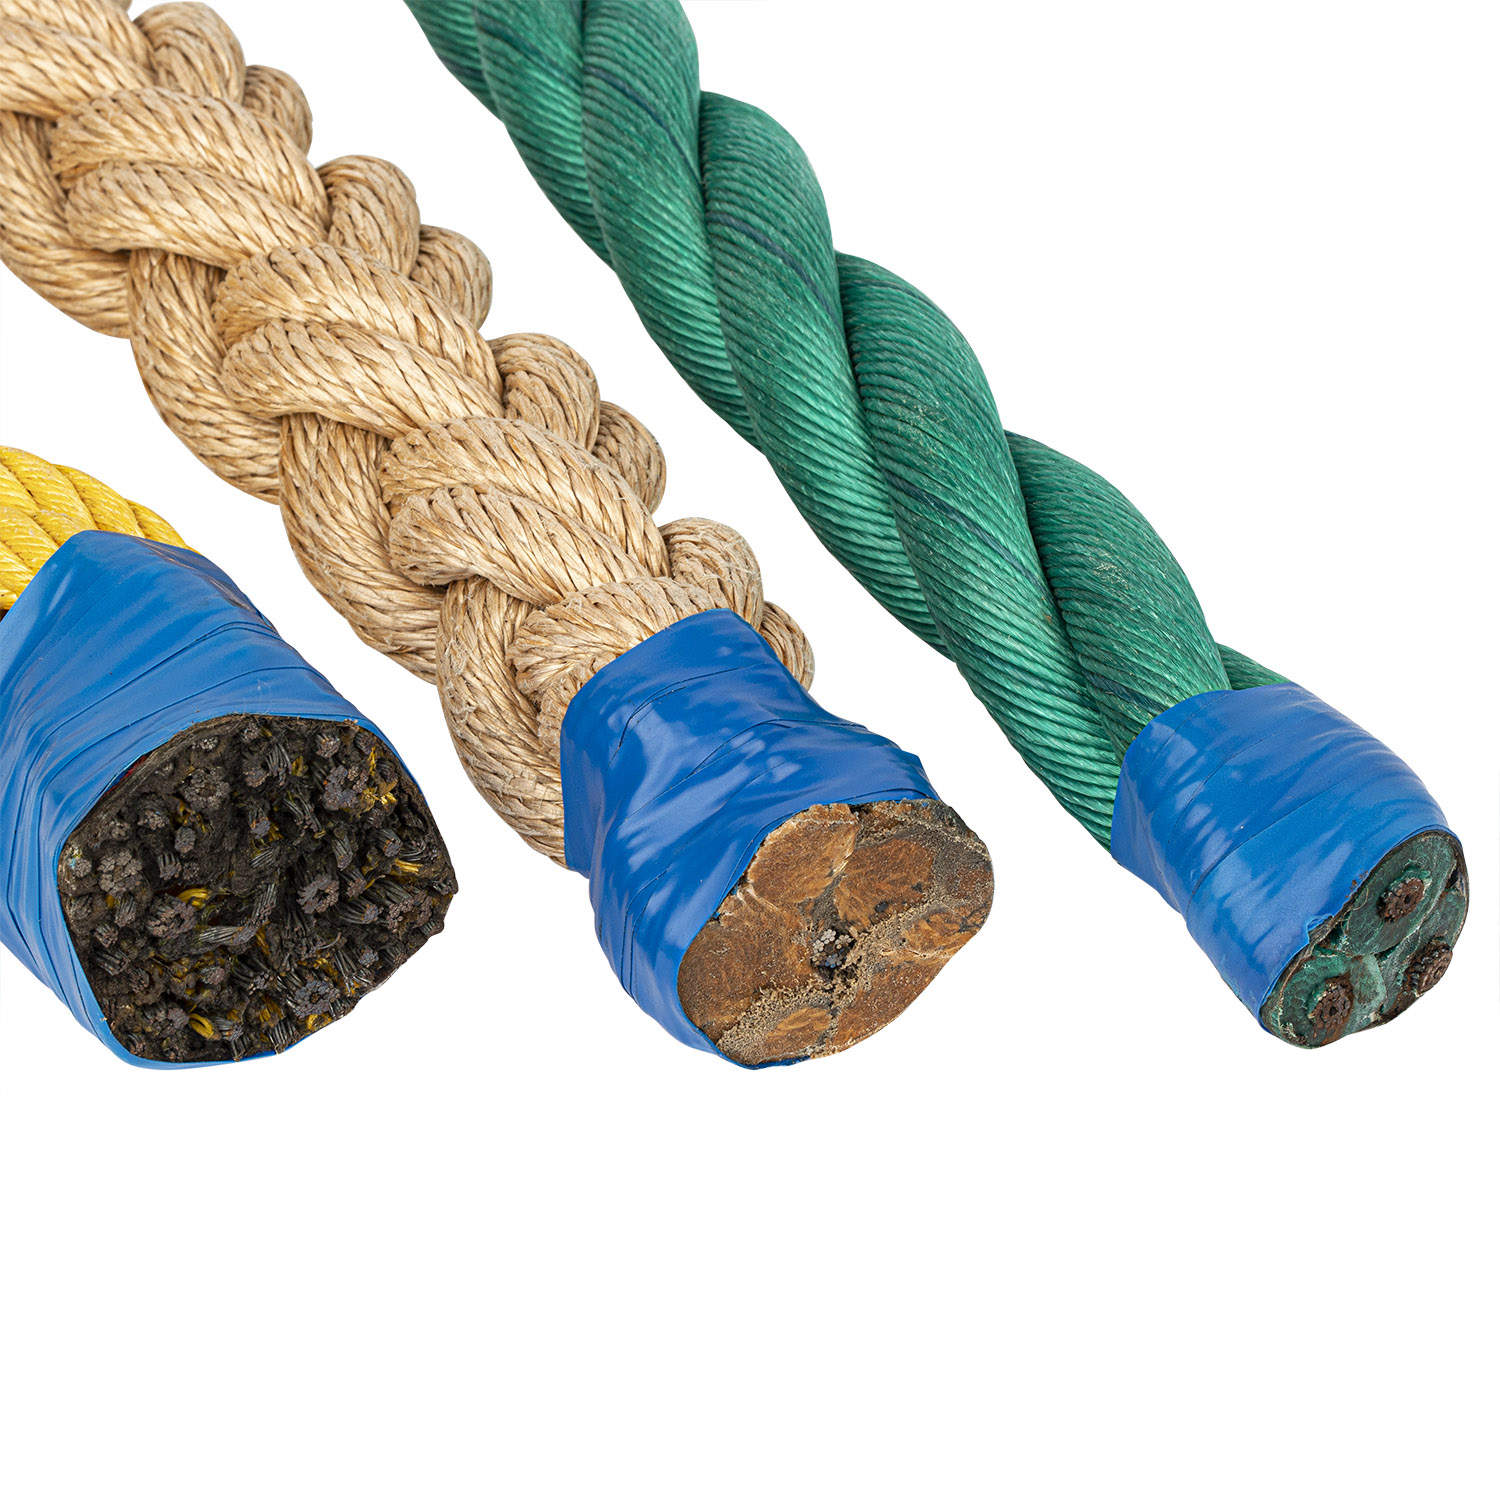 Professional Factory Steel Rope Combination Rope for Mooring